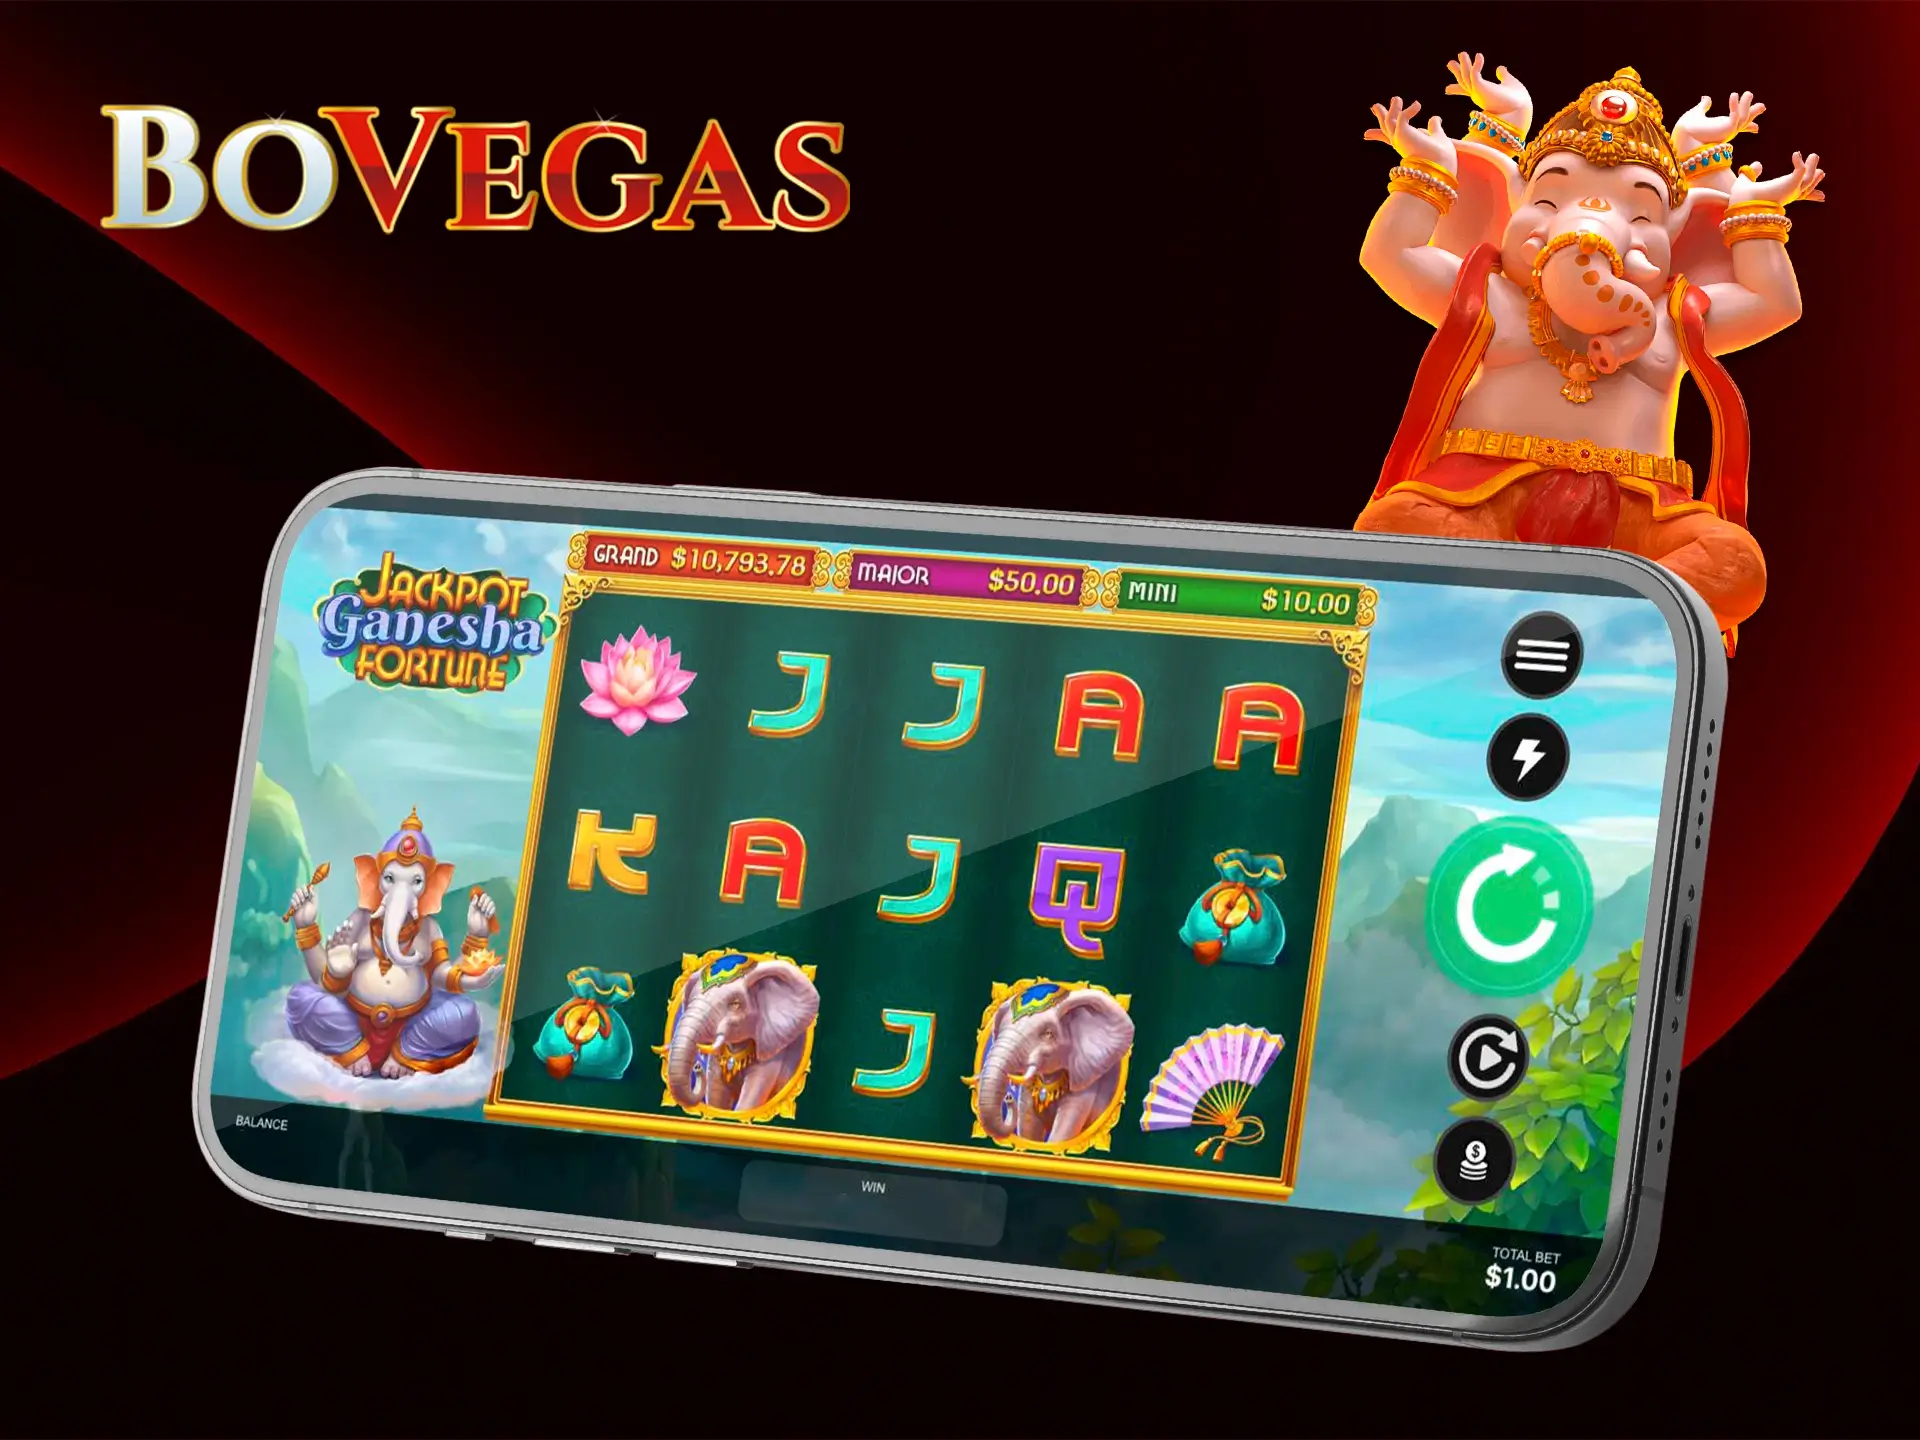 The mobile app from BoVegas Casino gives its users the ability to play jackpot games from anywhere in the world.